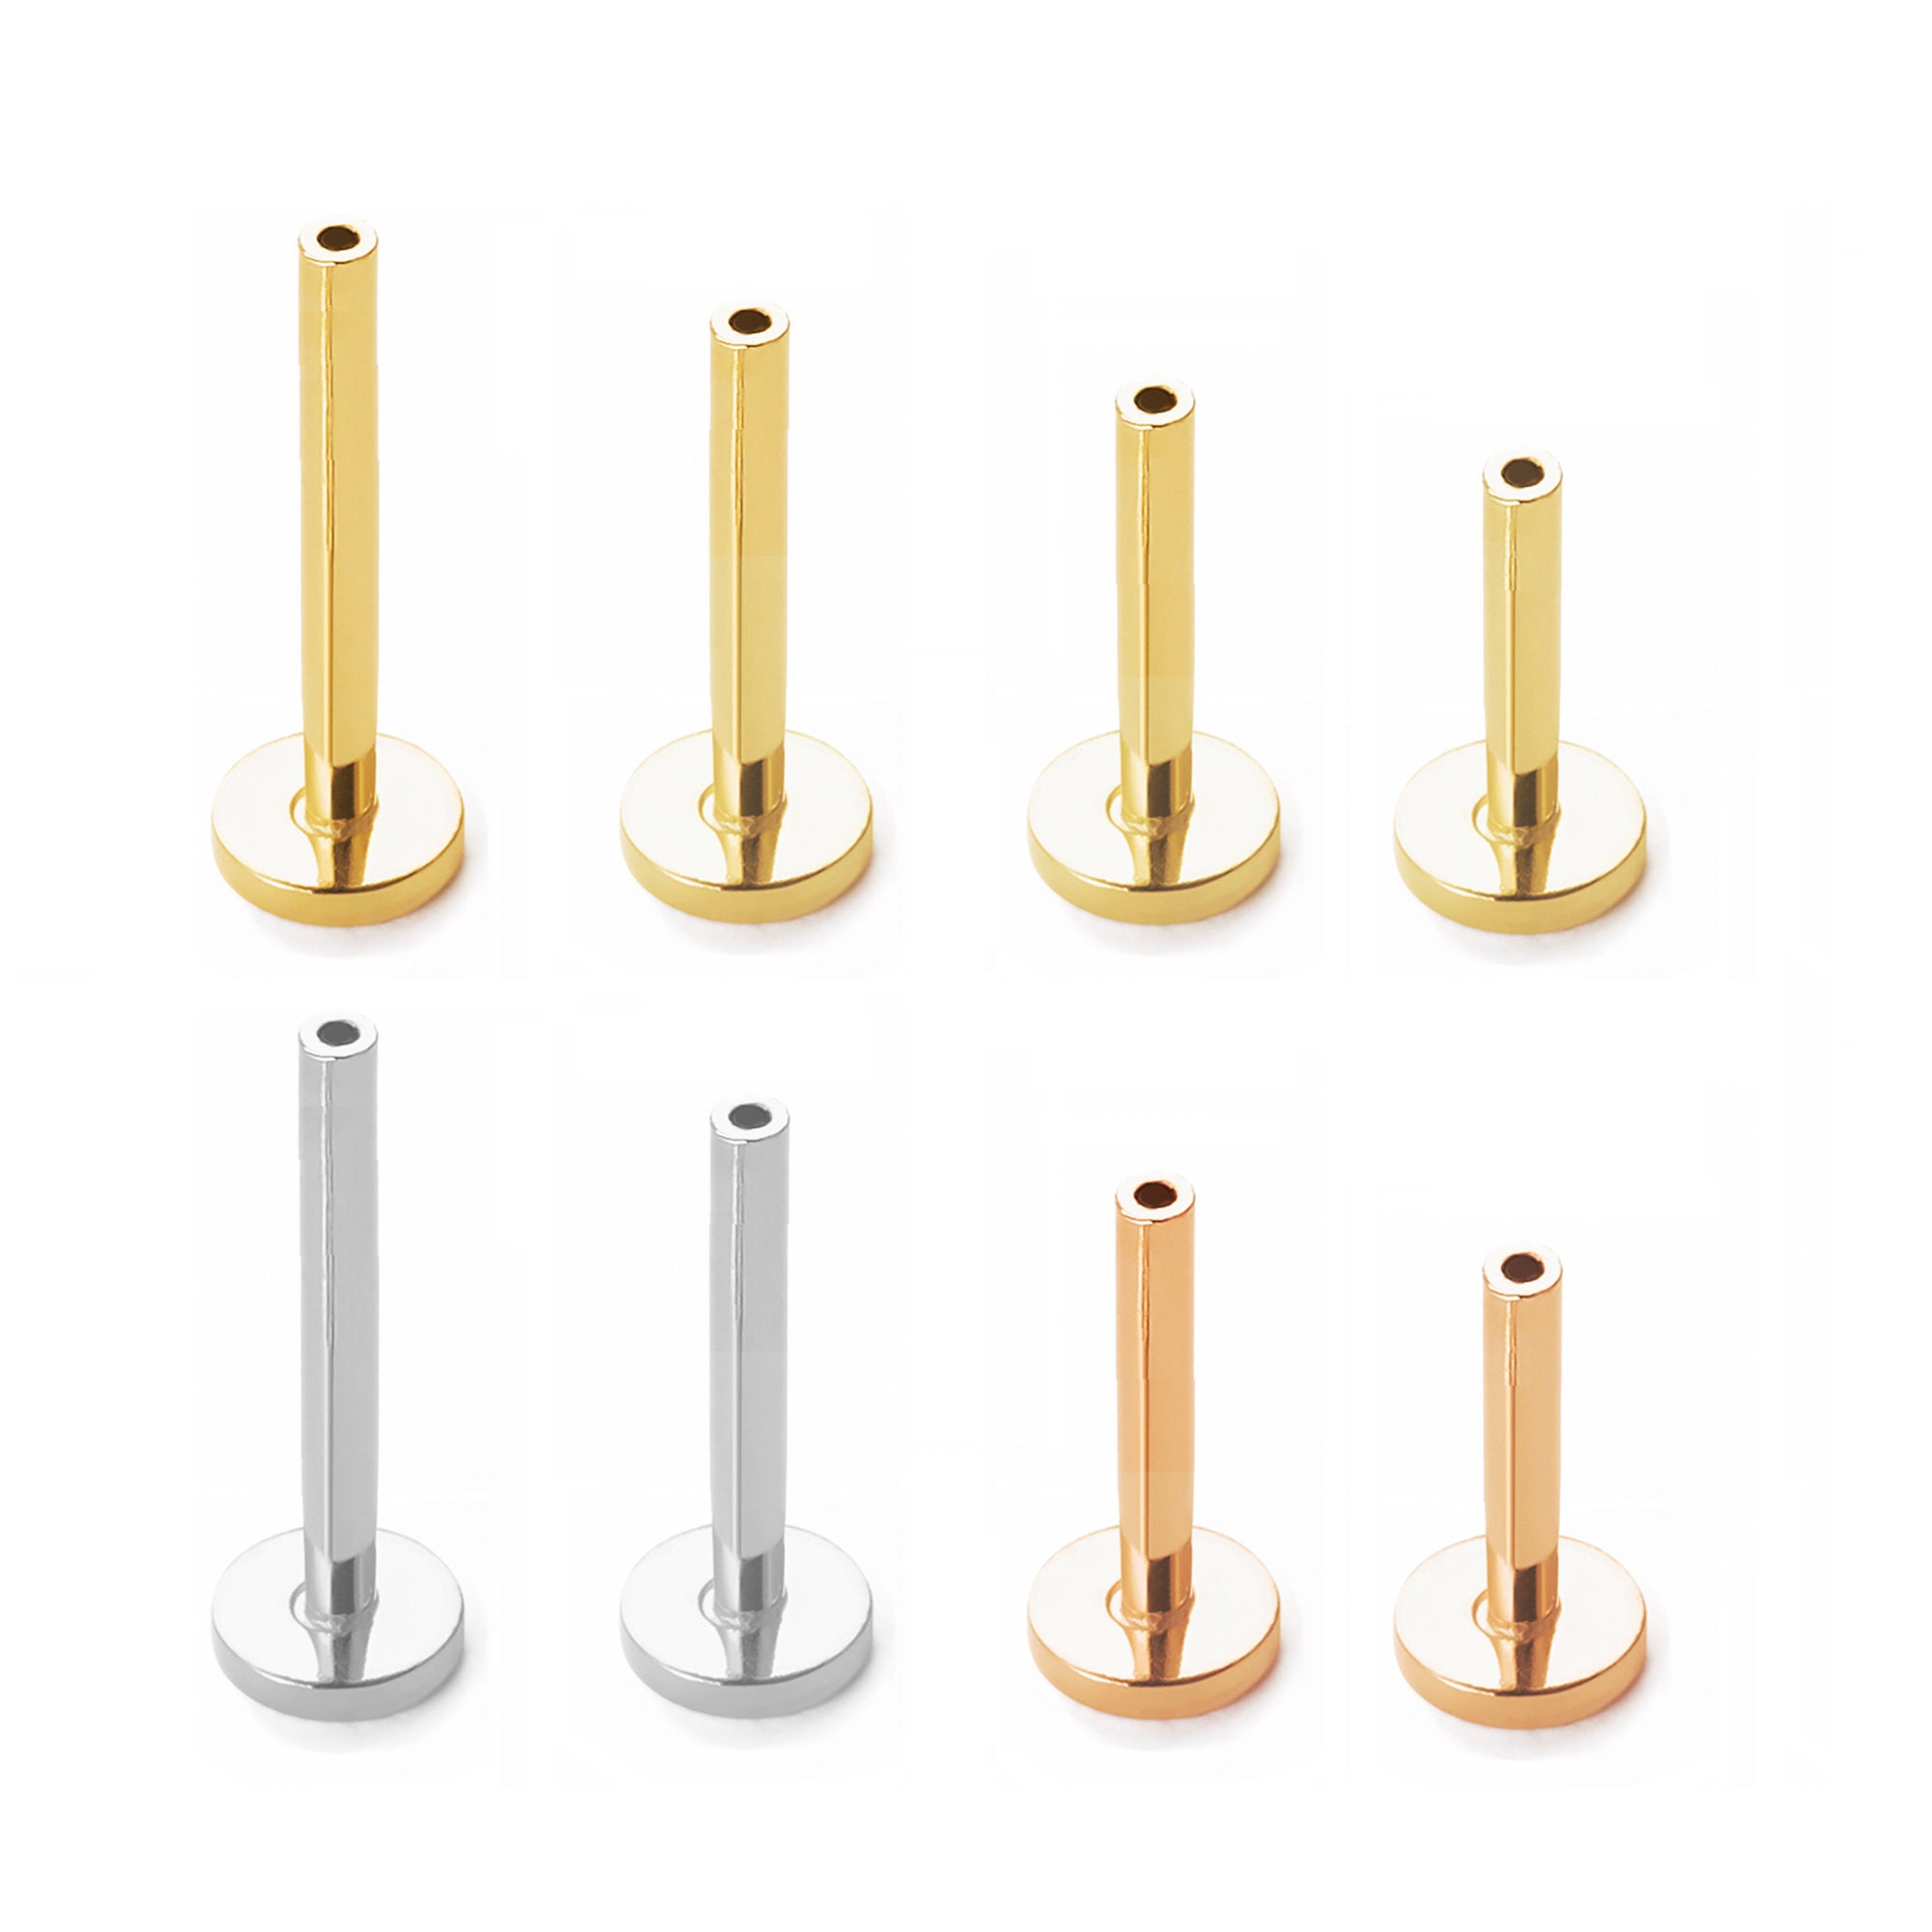 14K Solid Gold Threadless Labret Push Pin Compatible Flat Back Post 16 Gauge with 6mm Post Length (FOR Fresh & Healed Piercing)